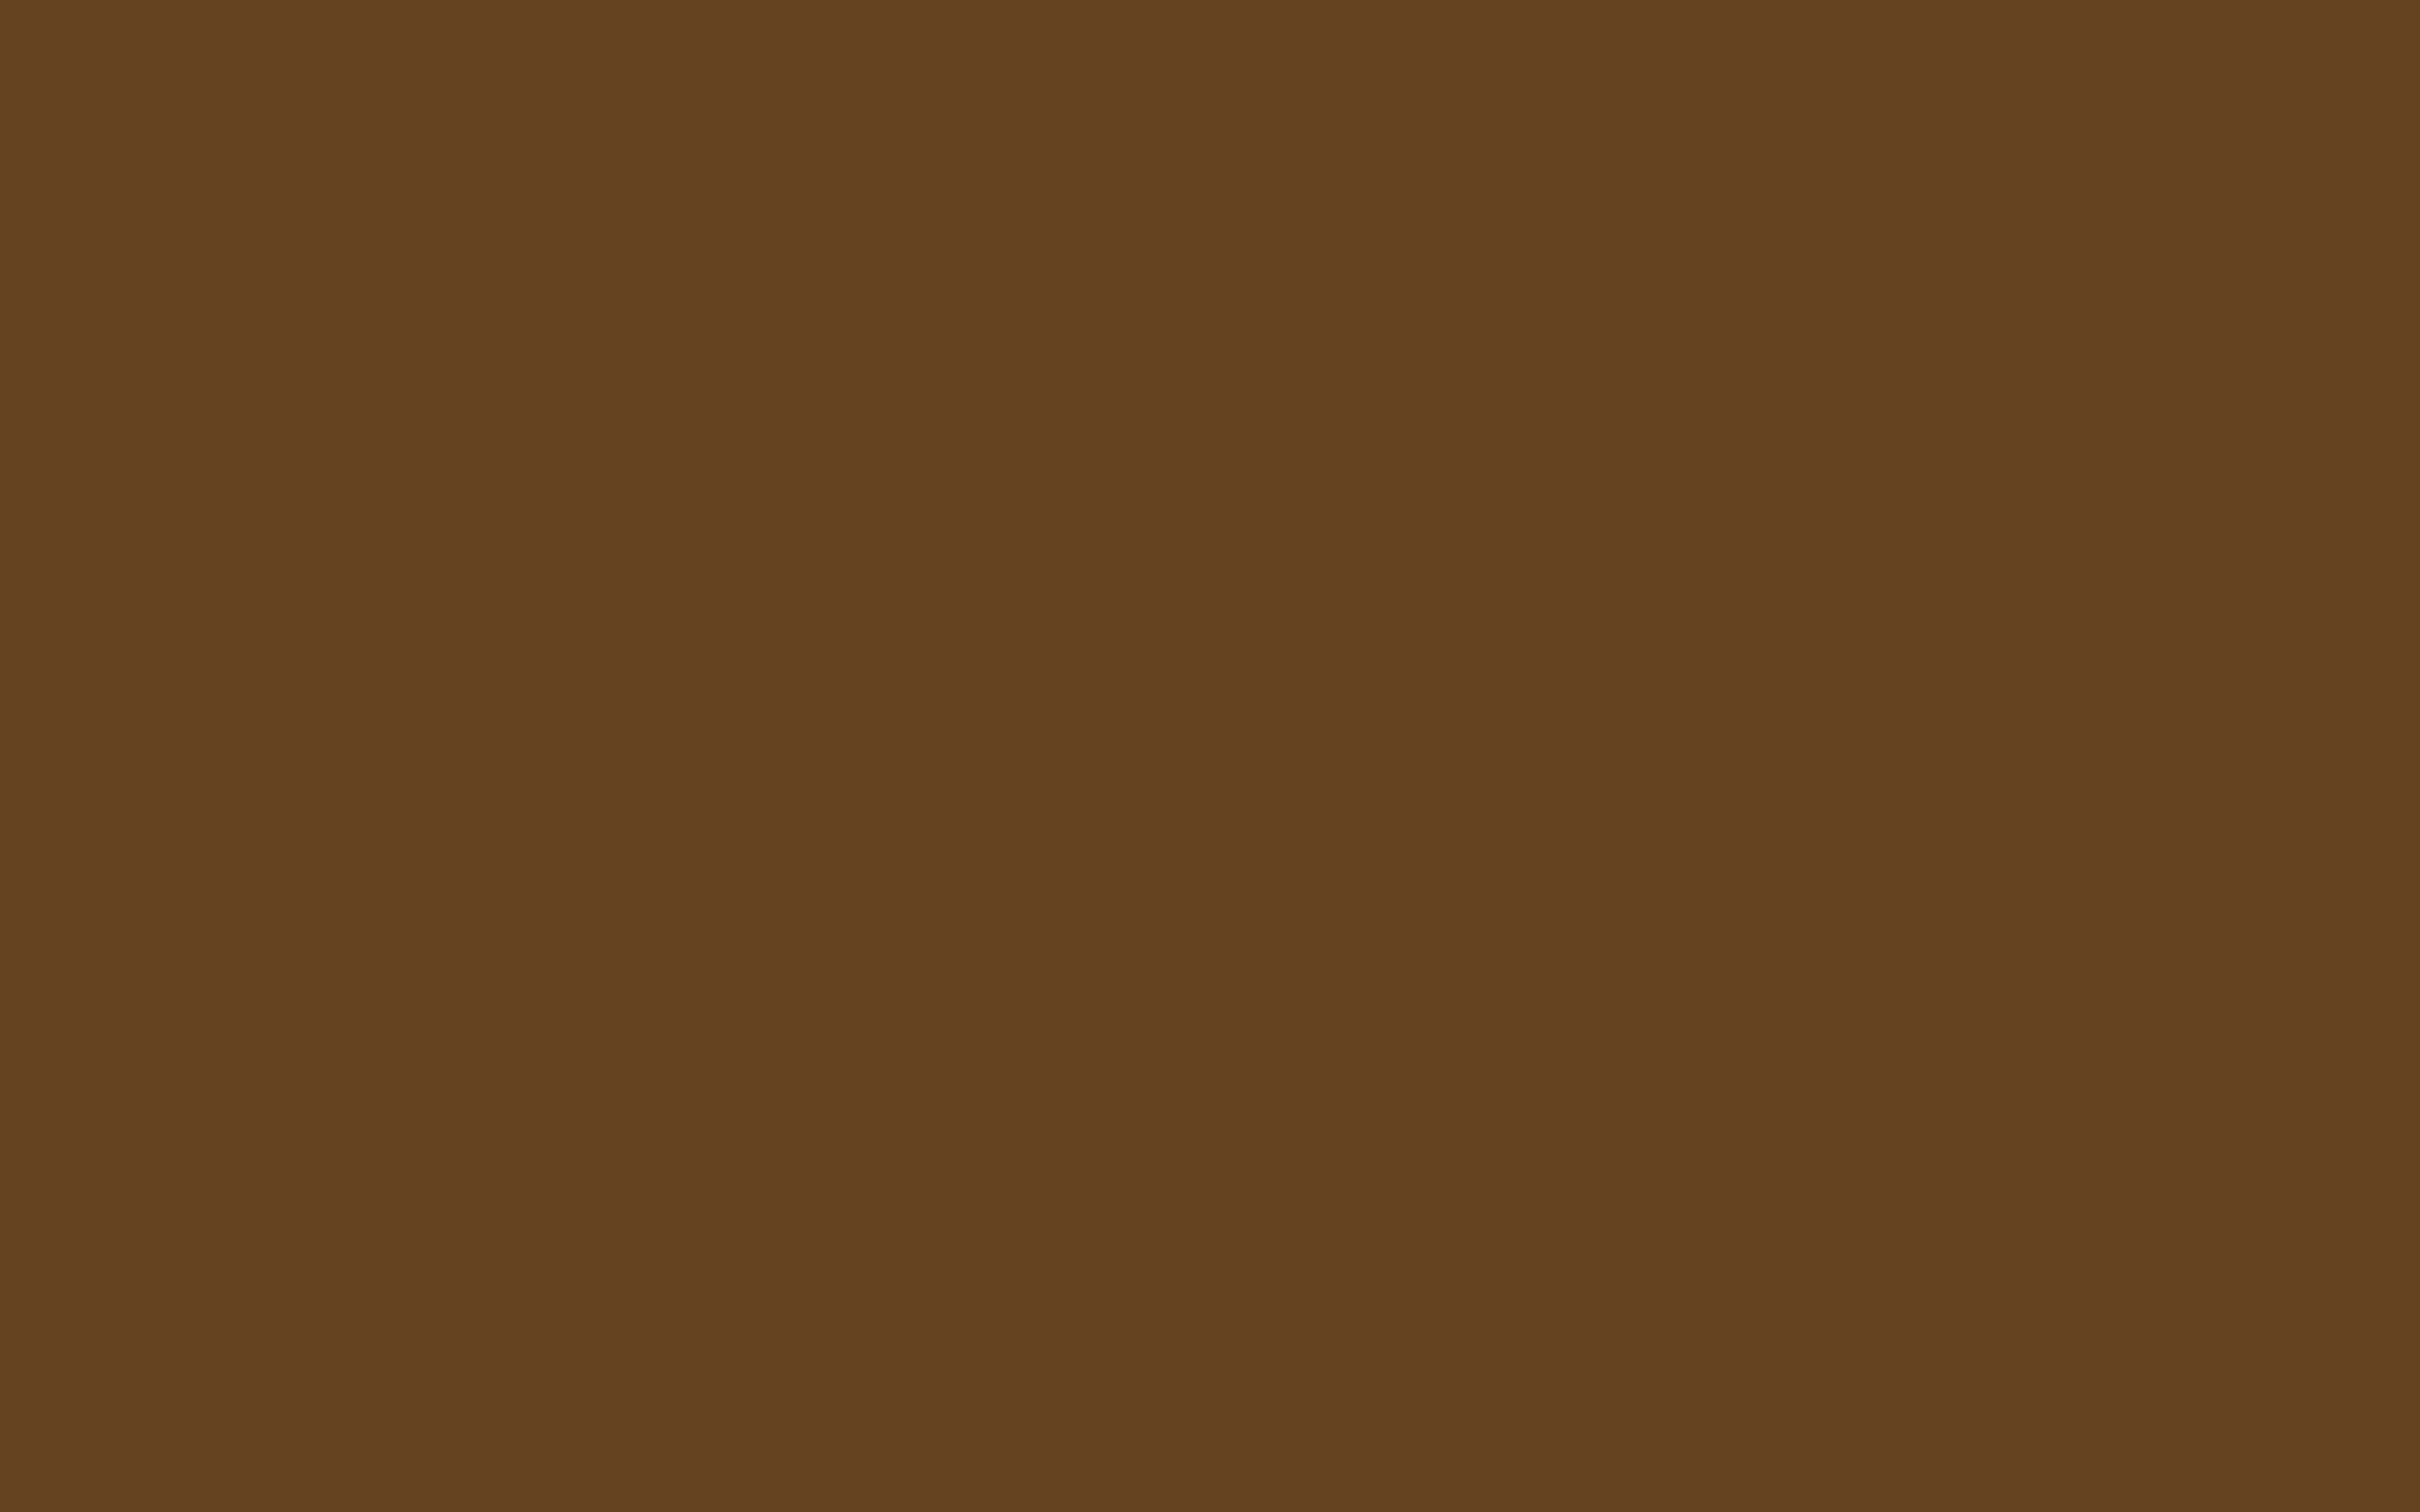 Resolution Dark Brown Solid Color Background And